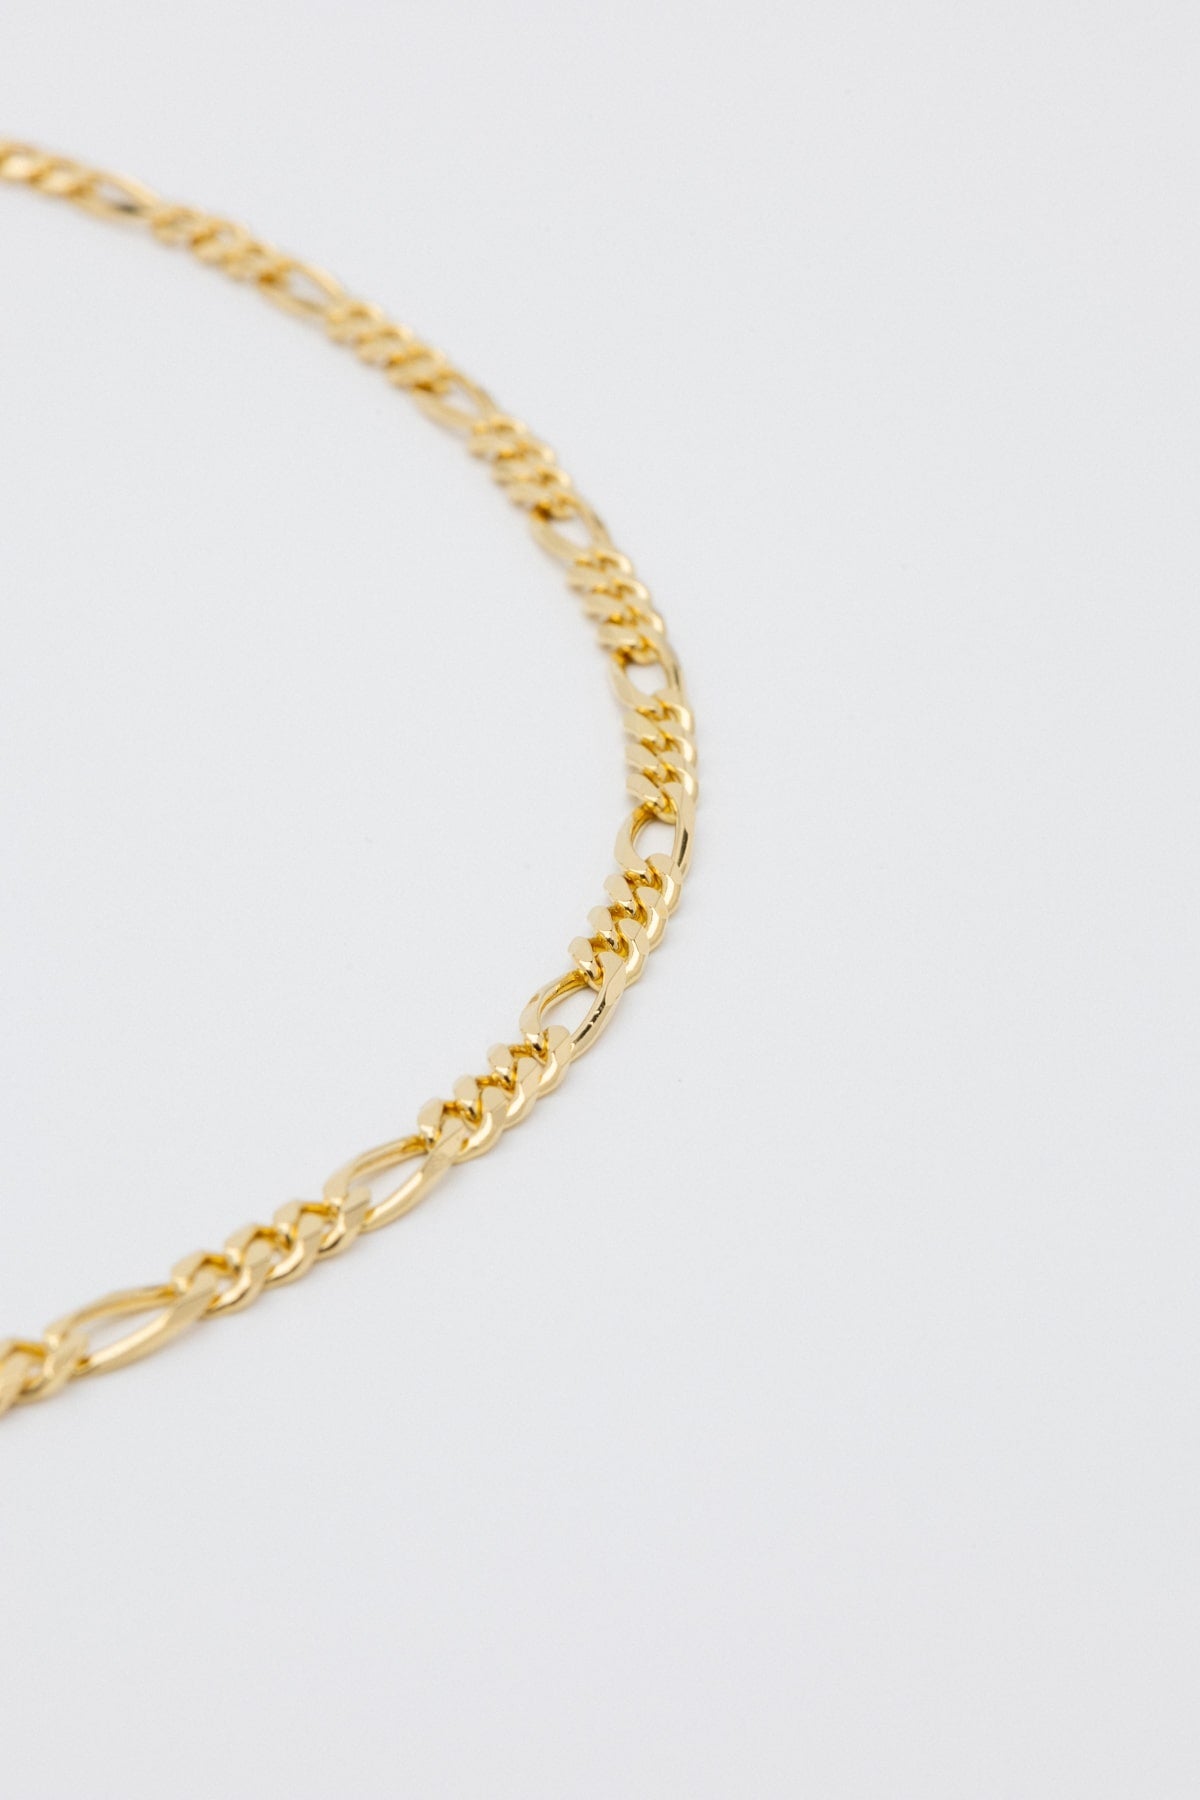 B213 / TOM WOOD FIGARO CHAIN NECKLACE - GOLD